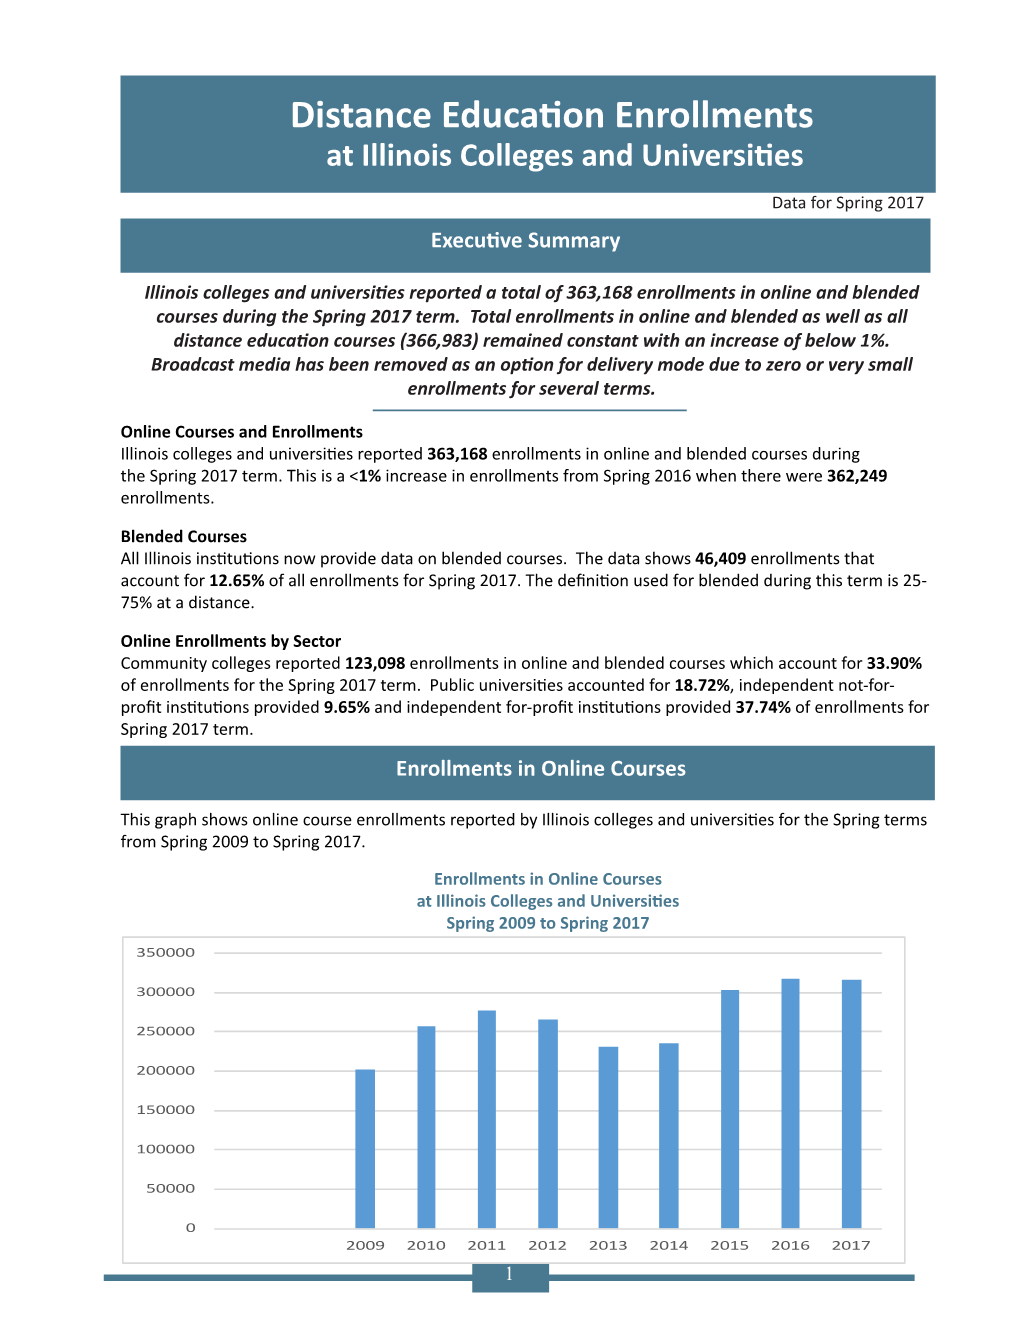 Distance Education Enrollments at Illinois Colleges and Universities